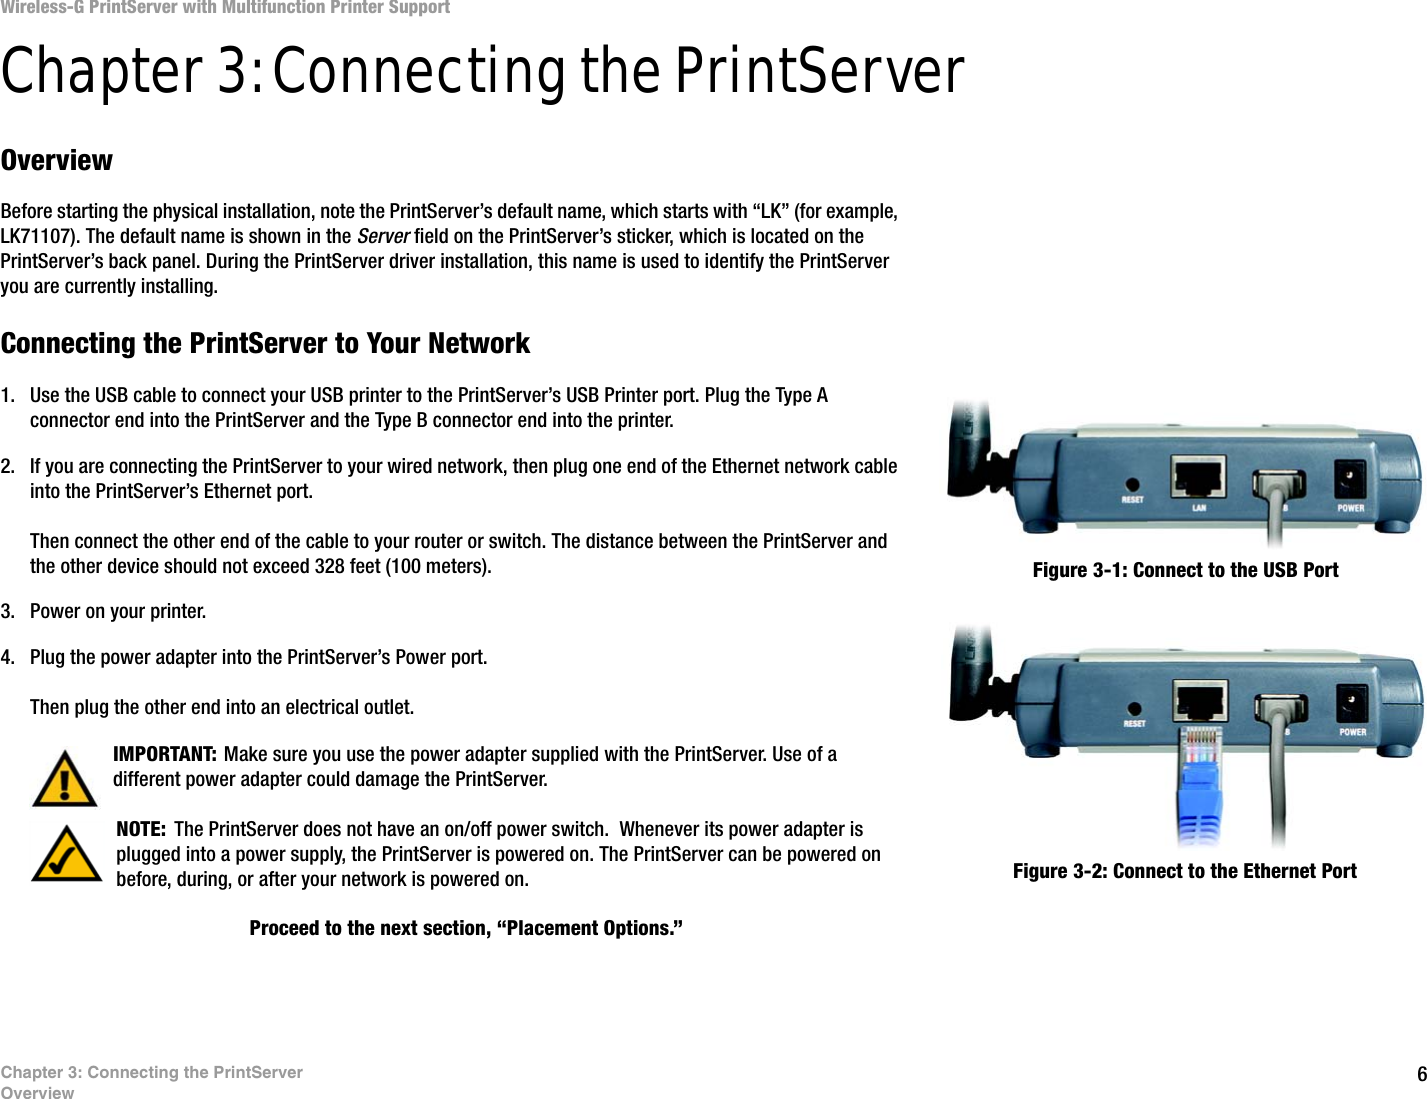 6Chapter 3: Connecting the PrintServerOverviewWireless-G PrintServer with Multifunction Printer SupportChapter 3: Connecting the PrintServer Overview Before starting the physical installation, note the PrintServer’s default name, which starts with “LK” (for example, LK71107). The default name is shown in the Server field on the PrintServer’s sticker, which is located on the PrintServer’s back panel. During the PrintServer driver installation, this name is used to identify the PrintServer you are currently installing.Connecting the PrintServer to Your Network1. Use the USB cable to connect your USB printer to the PrintServer’s USB Printer port. Plug the Type A connector end into the PrintServer and the Type B connector end into the printer.2. If you are connecting the PrintServer to your wired network, then plug one end of the Ethernet network cable into the PrintServer’s Ethernet port.Then connect the other end of the cable to your router or switch. The distance between the PrintServer and the other device should not exceed 328 feet (100 meters).3. Power on your printer.4. Plug the power adapter into the PrintServer’s Power port.Then plug the other end into an electrical outlet.Proceed to the next section, “Placement Options.”Figure 3-1: Connect to the USB PortNOTE: The PrintServer does not have an on/off power switch.  Whenever its power adapter is plugged into a power supply, the PrintServer is powered on. The PrintServer can be powered on before, during, or after your network is powered on.  Figure 3-2: Connect to the Ethernet PortIMPORTANT: Make sure you use the power adapter supplied with the PrintServer. Use of a different power adapter could damage the PrintServer.